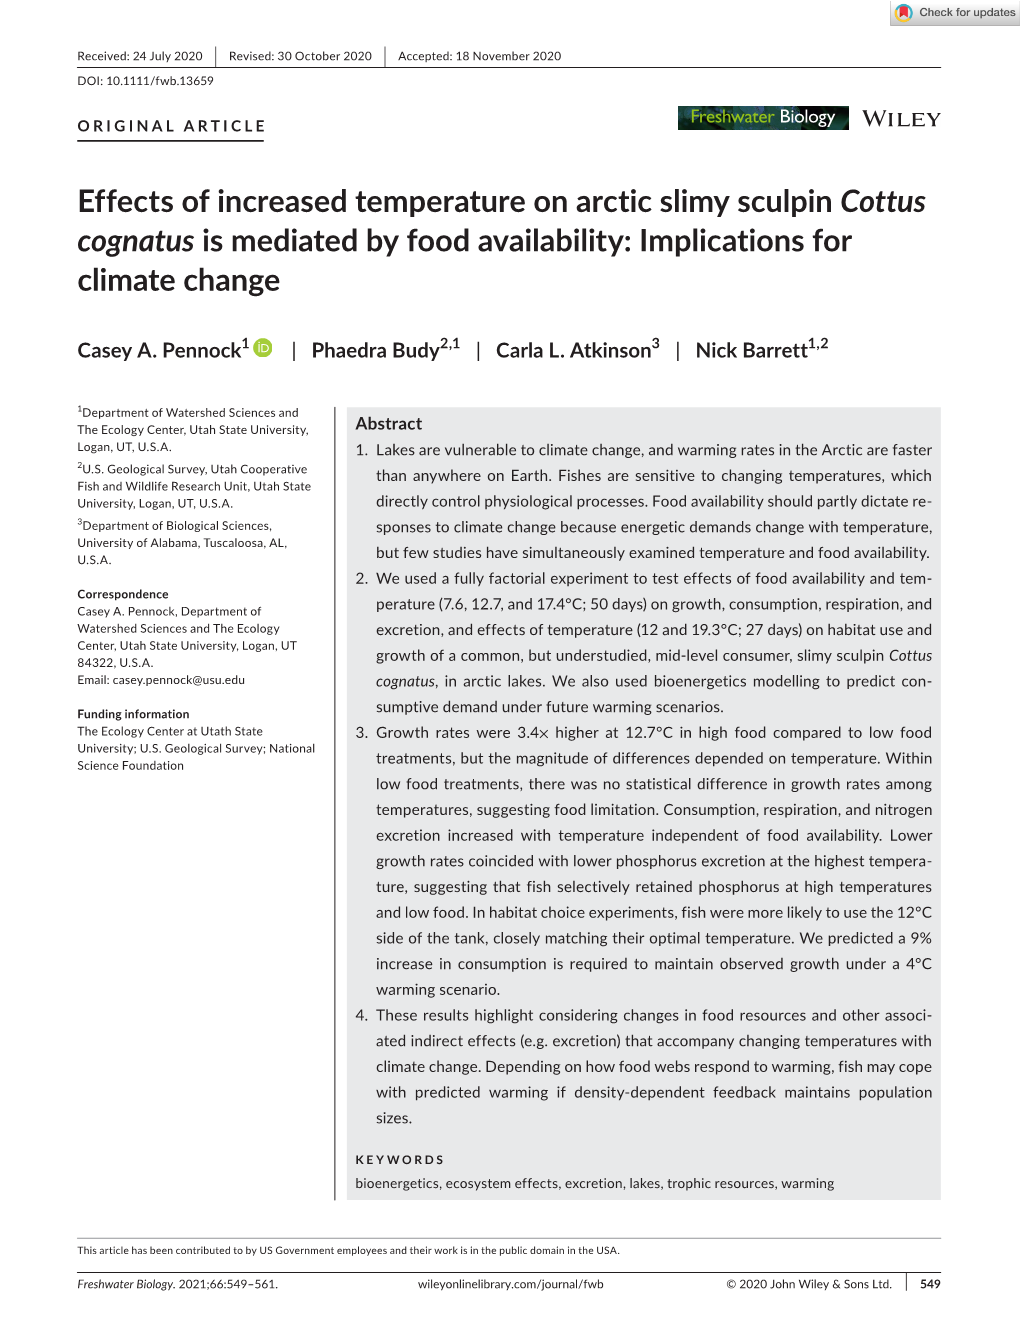 Effects of Increased Temperature on Arctic Slimy Sculpin Cottus Cognatus Is Mediated by Food Availability: Implications for Climate Change